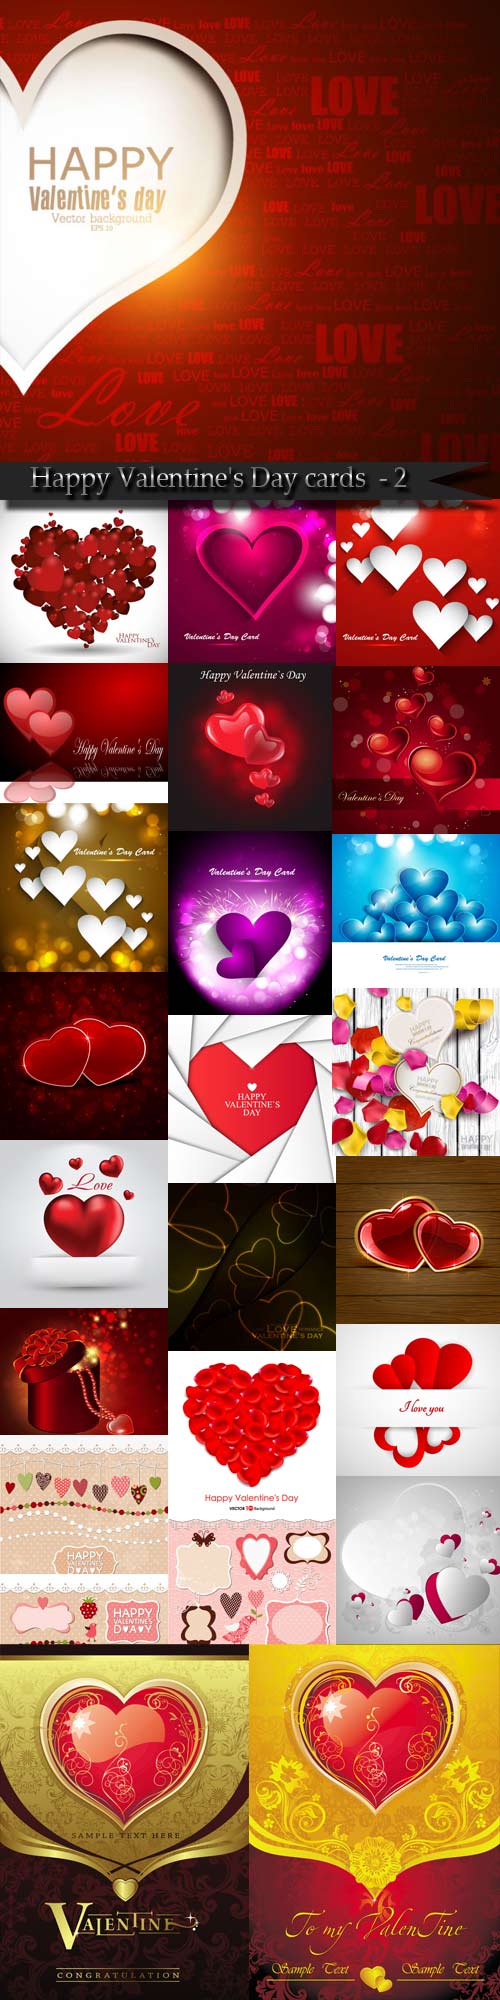 Happy Valentine's Day cards and backgrounds - 2